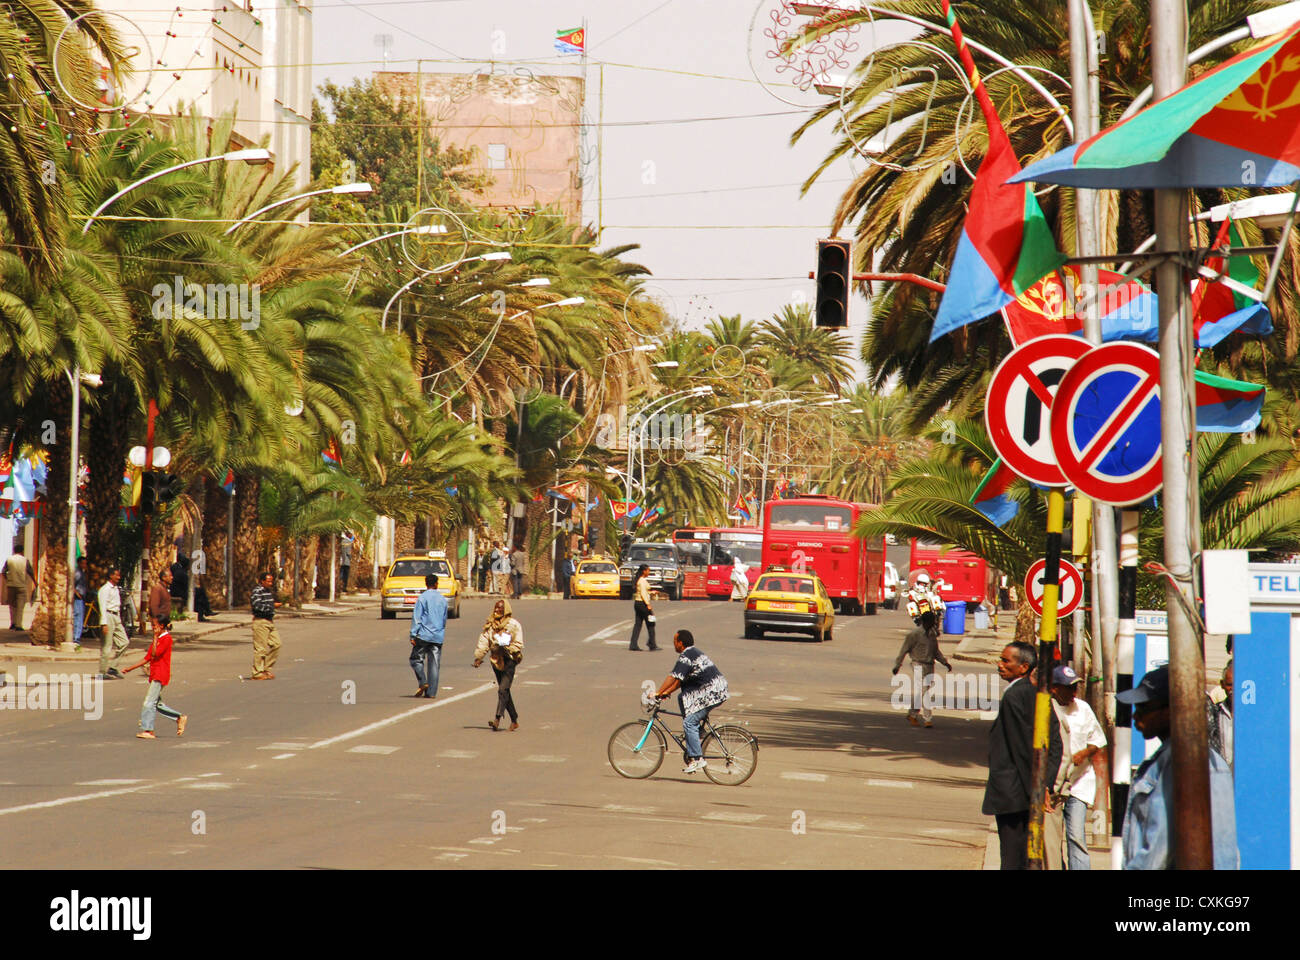 Eritrea, Asmara, a wide avenue in the city center during the anniversary of Eritrea's independence from Ethiopia Stock Photo